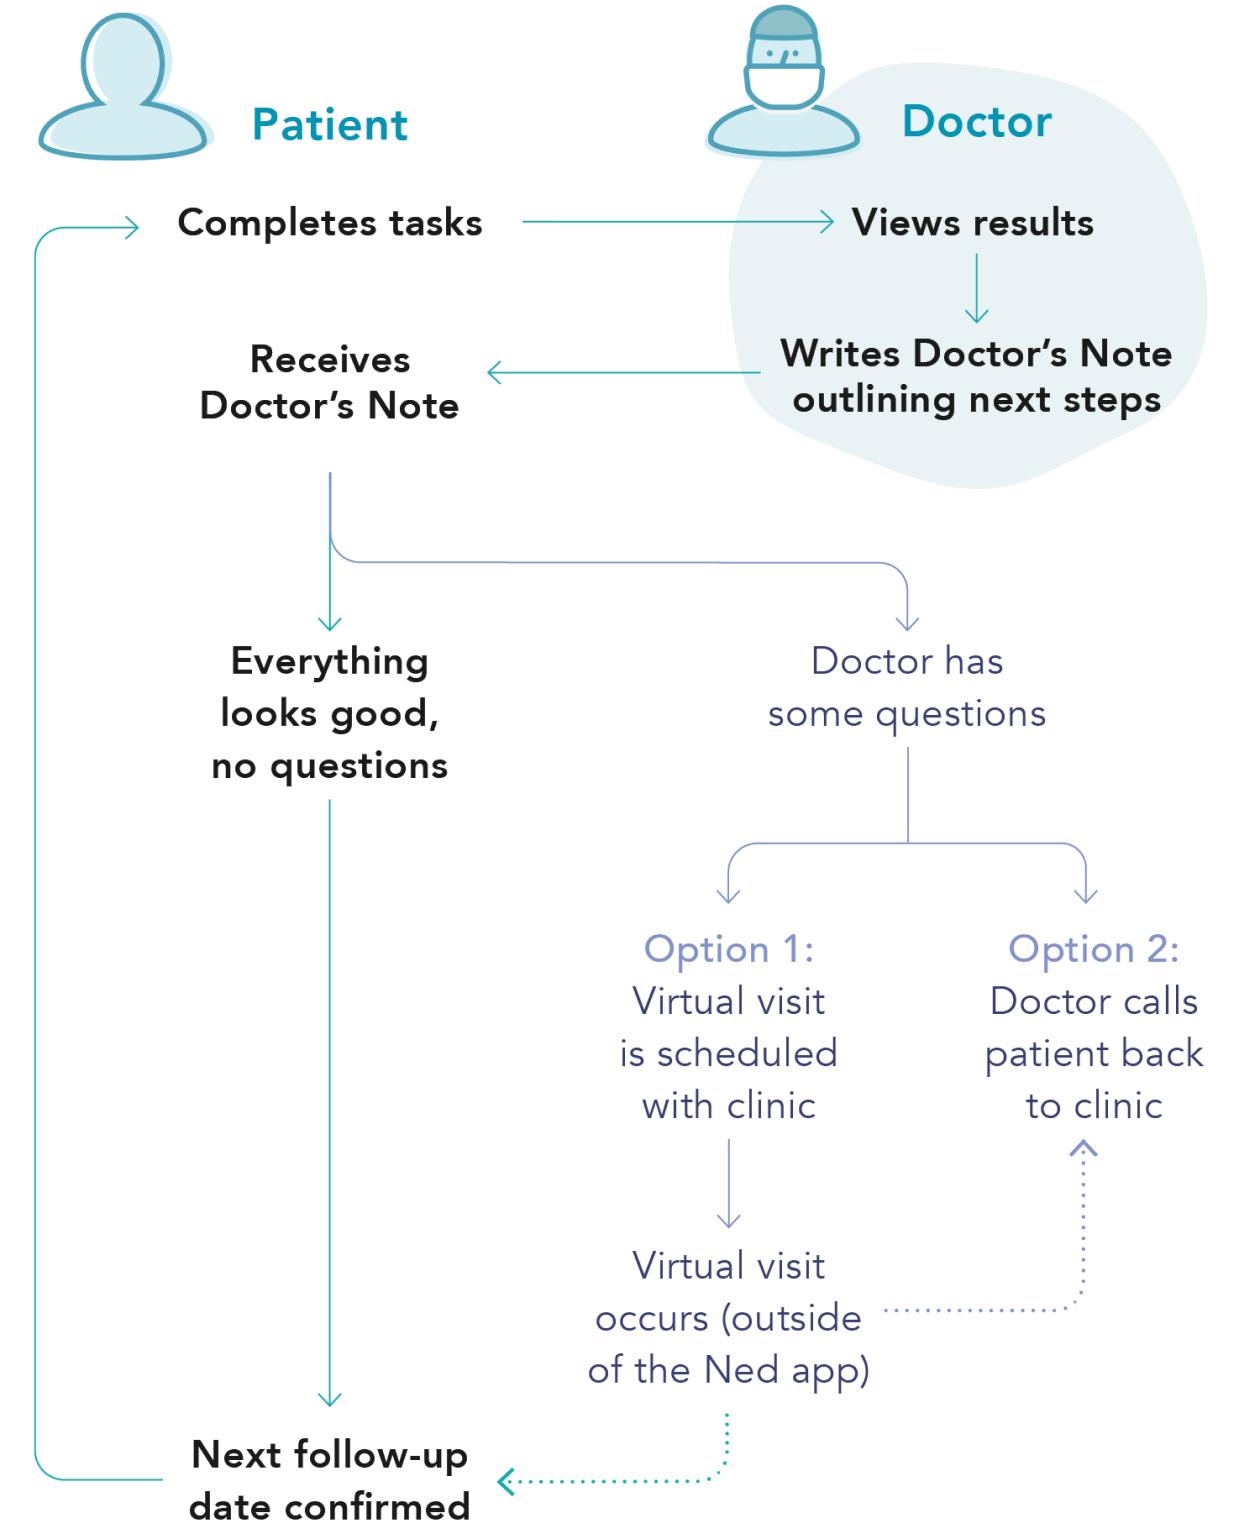 This is an image of the stages of the Ned Clinic. These stages are described in the User Guide.